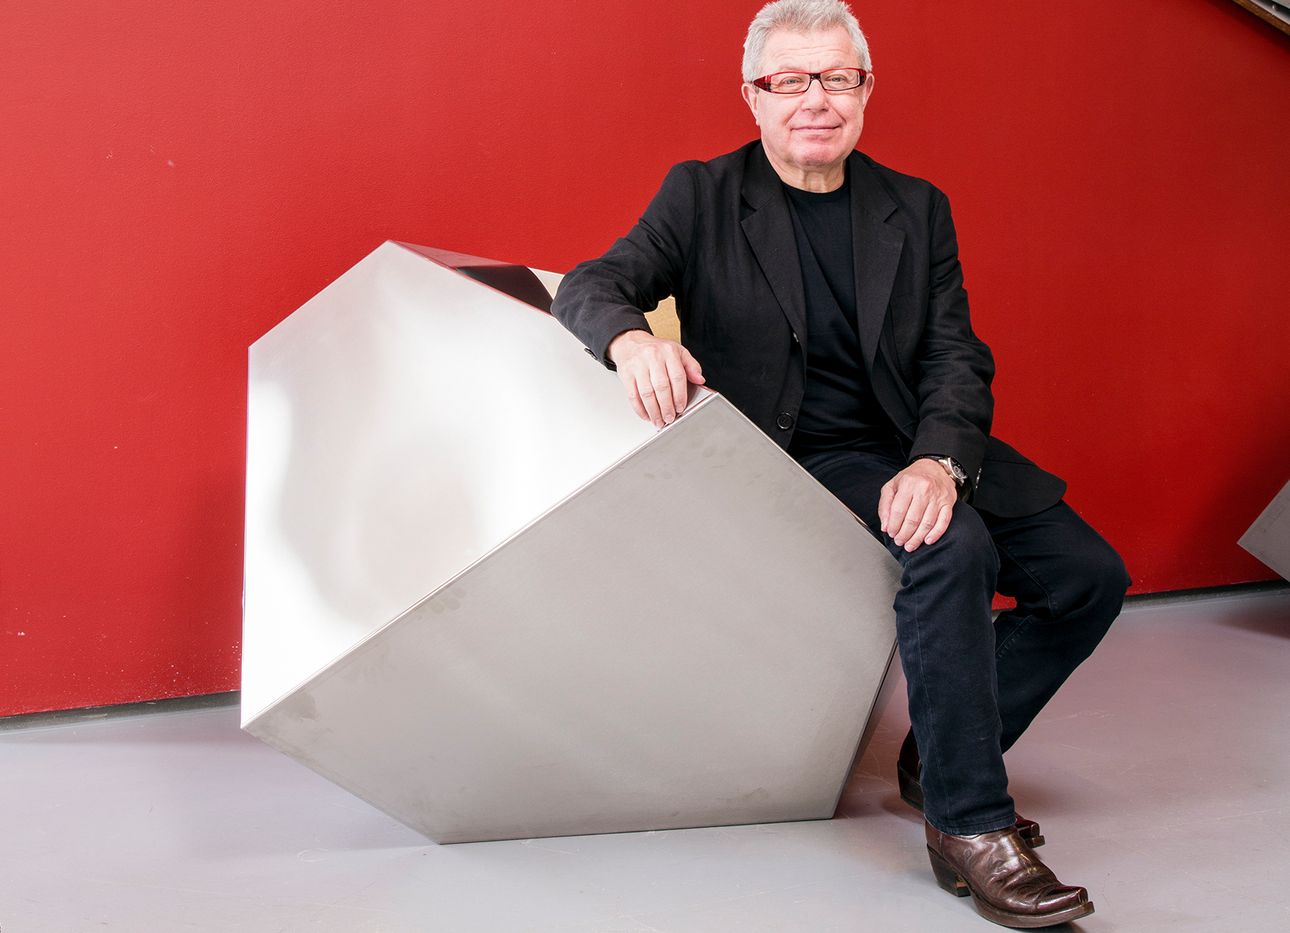 Daniel Libeskind in a black suit in front of a red wall, sitting on a geometric seat.